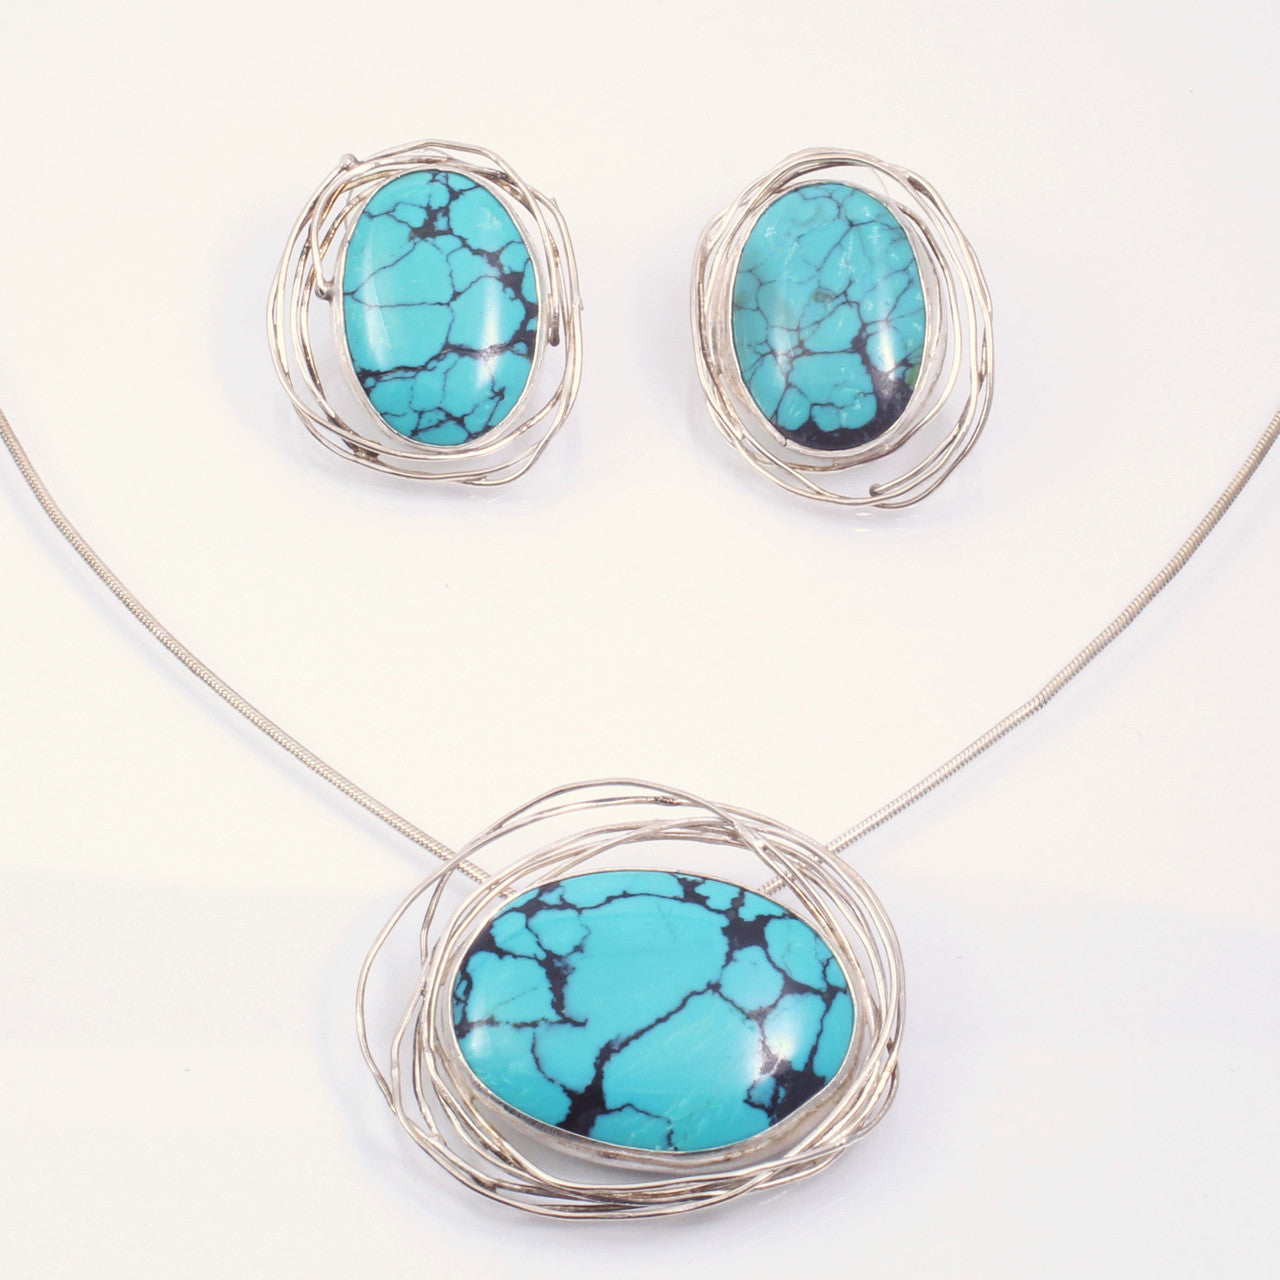 In Orbit Earring and Pendant Set with Turquoise